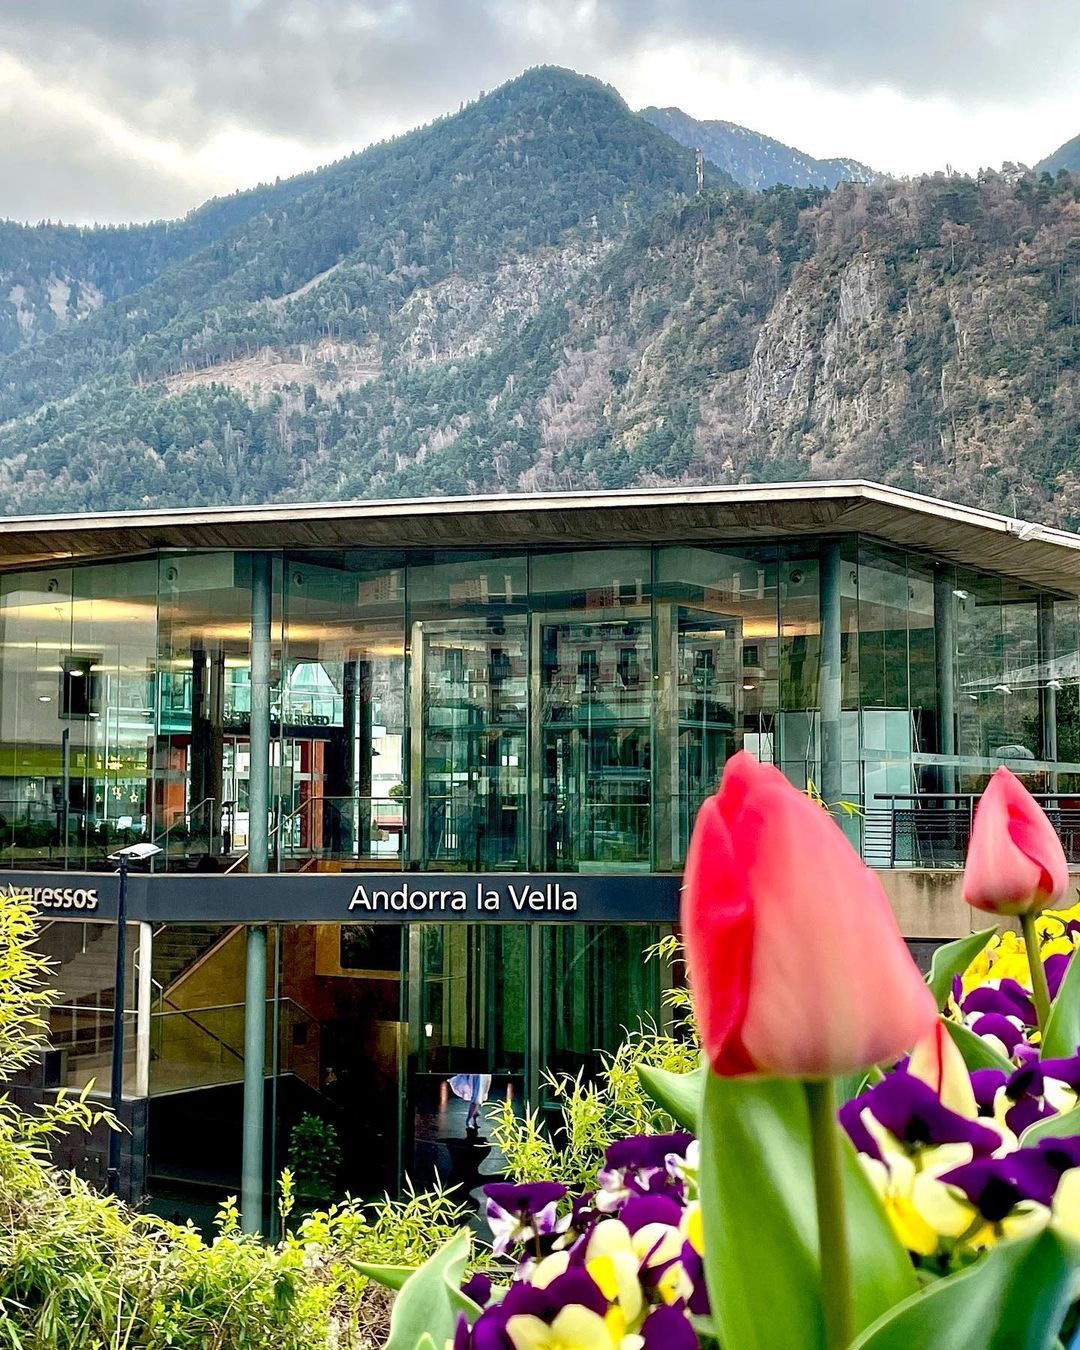 MIEUX FISCAL INVESTISSEMENT EN ANDORRE. https://www.mieuxfiscal.fr/ Andorre propose des avantages multiples et permet aux entreprises et aux personnes physiques de se libérer de la pression fiscale considérable exercée par l’administration fiscale. Nos solutions: Optimisation fiscale | Création société en Andorre | Les bénéfices d'un investissement en Andorre | L'Andorre est un pays proposant de multiples bénéfices pour les investisseurs avides de saisir de nouvelles opportunités. Les avantages économiques, financiers et fiscaux, et une qualité de vie parmi les plus enviées du monde, font de ce pays des Pyrénées une destination de choix pour investir. L'Andorre est l'un des pays les plus attrayants pour les investisseurs. Créer une société ou acheter des actions est peut-être votre meilleure option. Vous pouvez commencer par devenir résident fiscal en Andorre. Il n'existe pas d'impôt sur la succession en Andorre ni d'impôt sur la fortune. https://www.mieuxfiscal.fr/nous-contacter/ La principauté d'Andorre permet aux investisseurs de bénéficier de conditions optimales en comparaison d'autres marchés et pays voisins. Mieuxfiscal Andorre est spécialisée dans l’optimisation et l’expatriation fiscale en Andorre, afin de redonner de l’oxygène aux entreprises et aux particuliers. La Principauté d’Andorre : un pays coopérant à faible fiscalité, 10 %. Créer son entreprise en Andorre. Devenir résident andorran. La Principauté d’Andorre: un pays coopérant à faible fiscalité. Malgré les idées reçues, Andorre n’est pas un paradis fiscal, mais un pays coopérant à faible fiscalité. En 2015, la France et l’Andorre signent une convention de non double imposition. Andorre respecte par ailleurs l’échange d’information sur des données fiscales des non-résidents ainsi que la déclaration des bénéficiaires effectifs : Andorre et ses agents économiques sont en conformité avec l’ensemble des directives internationales. Rendez-vous en ligne · Services sur place. Adresse: Carrer Pau Casals, 8. Ed. Cornella 2, 2º, 1 ª, AD500 Andorra la Vella, Andorre. Téléphone : +376887777. https://www.mieuxfiscal.fr/ OUR SERVICES Pre-Arrival Support Help Assessment Questionnaire, Location Information Overview, Budget Planning Physical Moving Assistance. Housing Helping to find you a new home – an overview of the housing market, location analysis, accommodation search, coordination of visits, rental & other costs, rental agreement negotiations, legal contract assistance. We only work with experienced residential real estate agents who share in our philosophy that aim is to get “value for money” for the client and that any landlord is reputable and responsive to the needs of the client. Home Interior Depending on your housing requirement and budget, there may be need for arranging decorating and design (look and feel) of the interior elements of your home, which may also include the sourcing of furniture / equipment. School Assistance Information about the schooling system in the Andorra  Republic i.e. both the local and international curriculum. We arrange meetings with the relevant school enrolment officers so you and your child can visit and experience first hand the educational facilities and ask questions relating to their teaching methods, after schools activities etc. Additionally, we will assist you in gathering and submitting any requested academic records (including translating the documents), and support you with the school registration process. Medical / Doctors We will provide you a list of the key medical facilities and related costs (if applicable) in the city and help you to select a medical facility that best meets your needs. We are happy to accompany you to visit the doctor facilities prior to you making any decision. Immigration Assistance The residency application and registration process in the Andorra  Republic, depending on your nationality, is clearly defined however it is known to be a slightly complicated process as there is a need to provide different kinds of supporting documents as part of your residency application. We can guide you through this process ensuring your registration is submitted properly and follow-up to ensure you obtain the necessary residency status. Your Loving Pets Often overlooked by relocation companies, but pets most often form an integral part of a family structure and their needs also need to be catered for. Therefore, ensuring you have the proper legal ownership and medical certificates is important. Then of course knowing which pet grooming, pet sitting and veterinarian experts also is essential so that your pet enjoys its time too in the Andorra  Republic. Settling in Package Arranging for items such as utility registration – electricity, gas, water, internet, phone, international satellite TV providers and assistance with public authority registrations e.g. Andorra  health insurance cards, andorra driver’s license, purchasing / hiring a vehicle, setting up a new bank account, home insurance etc. City Orientation Tour How the local public transport system works and related costs (travel card etc), helping you to get to know your immediate neighbourhood or other parts of the city e.g. shops and services, museums, galleries, restaurants, cafes, sports clubs / facilities, hobbies & interests, theatres, exhibitions, concerts etc. Daily Concierge Even once you are settled in into your new accommodation, your children (if any) have started their new school and you are now slowly starting to get to know your way around the city, we can assist you with other items such as regular house cleaning, provide contacts for pre-qualified baby-sitters, /nannies, handymen or repairmen, book tickets for many of the culture events in Andorra  Republic, places of interest worth visiting or even simply arrange for a private driver to collect or take you to the airport or train station. Business Assistance In case you wish to set up your own business while living here, we will assist you with establishing either a self-employed/sole trader licence (and explaining the accompanying legal & tax requirements) or in case you prefer a company structure, then we can assist you with the registration process. Equally, on the latter option, we can also recommend a reputable company formation specialist who provides “off the shelf” ready-made legal entities that already have the requisite registration process completed. Daily Life Assistance Once settled and living here you may find yourself facing a situation where you might benefit from further help and support, e.g. Andorra  language lessons, planning a wedding / get married or even seeking to start a family (pregnancy) and therefore need legal and doctors advice. Alternatively, you may feel that the Andorra  Republic is a place to make a mid to long-term property investment and therefore need some information on property costs and returns. These are all matters we have experience with and can support you in. Departure Assistance Even though you will have probably really enjoyed living in this wonderful country, there may come a time when you are required for work or simply for other personal reasons to move on to pastures new. There will, of course, be some connected “house-keeping” matters to attend to do before (or even after) departing that if not addressed can turn into annoying little problems following you on to your next location. Examples of such items are ensuring you have carried out the proper legal execution of any notice periods on you rental accommodation, reclaiming rental security deposits, de-registration of utilities, uncollected income tax monies, bank account closures etc. What we have described above are many of the typical items that are important as can arise once relocating to a new place. At Simply Relocation, we leave it to you to decide what level of assistance you need. We are flexible and can be involved in as little or as deeply as you feel comfortable with or feel is appropriate. We see our role as a support and advice service, and only if and when called upon by the client. Not only that, but we do not see it as our role to interfere with how you might wish to organize your private life while living in the Andorra  Republic. What we do assure you is complete confidentiality once you engage Simply Relocation to assist with any tasks that you feel you need support or guidance.